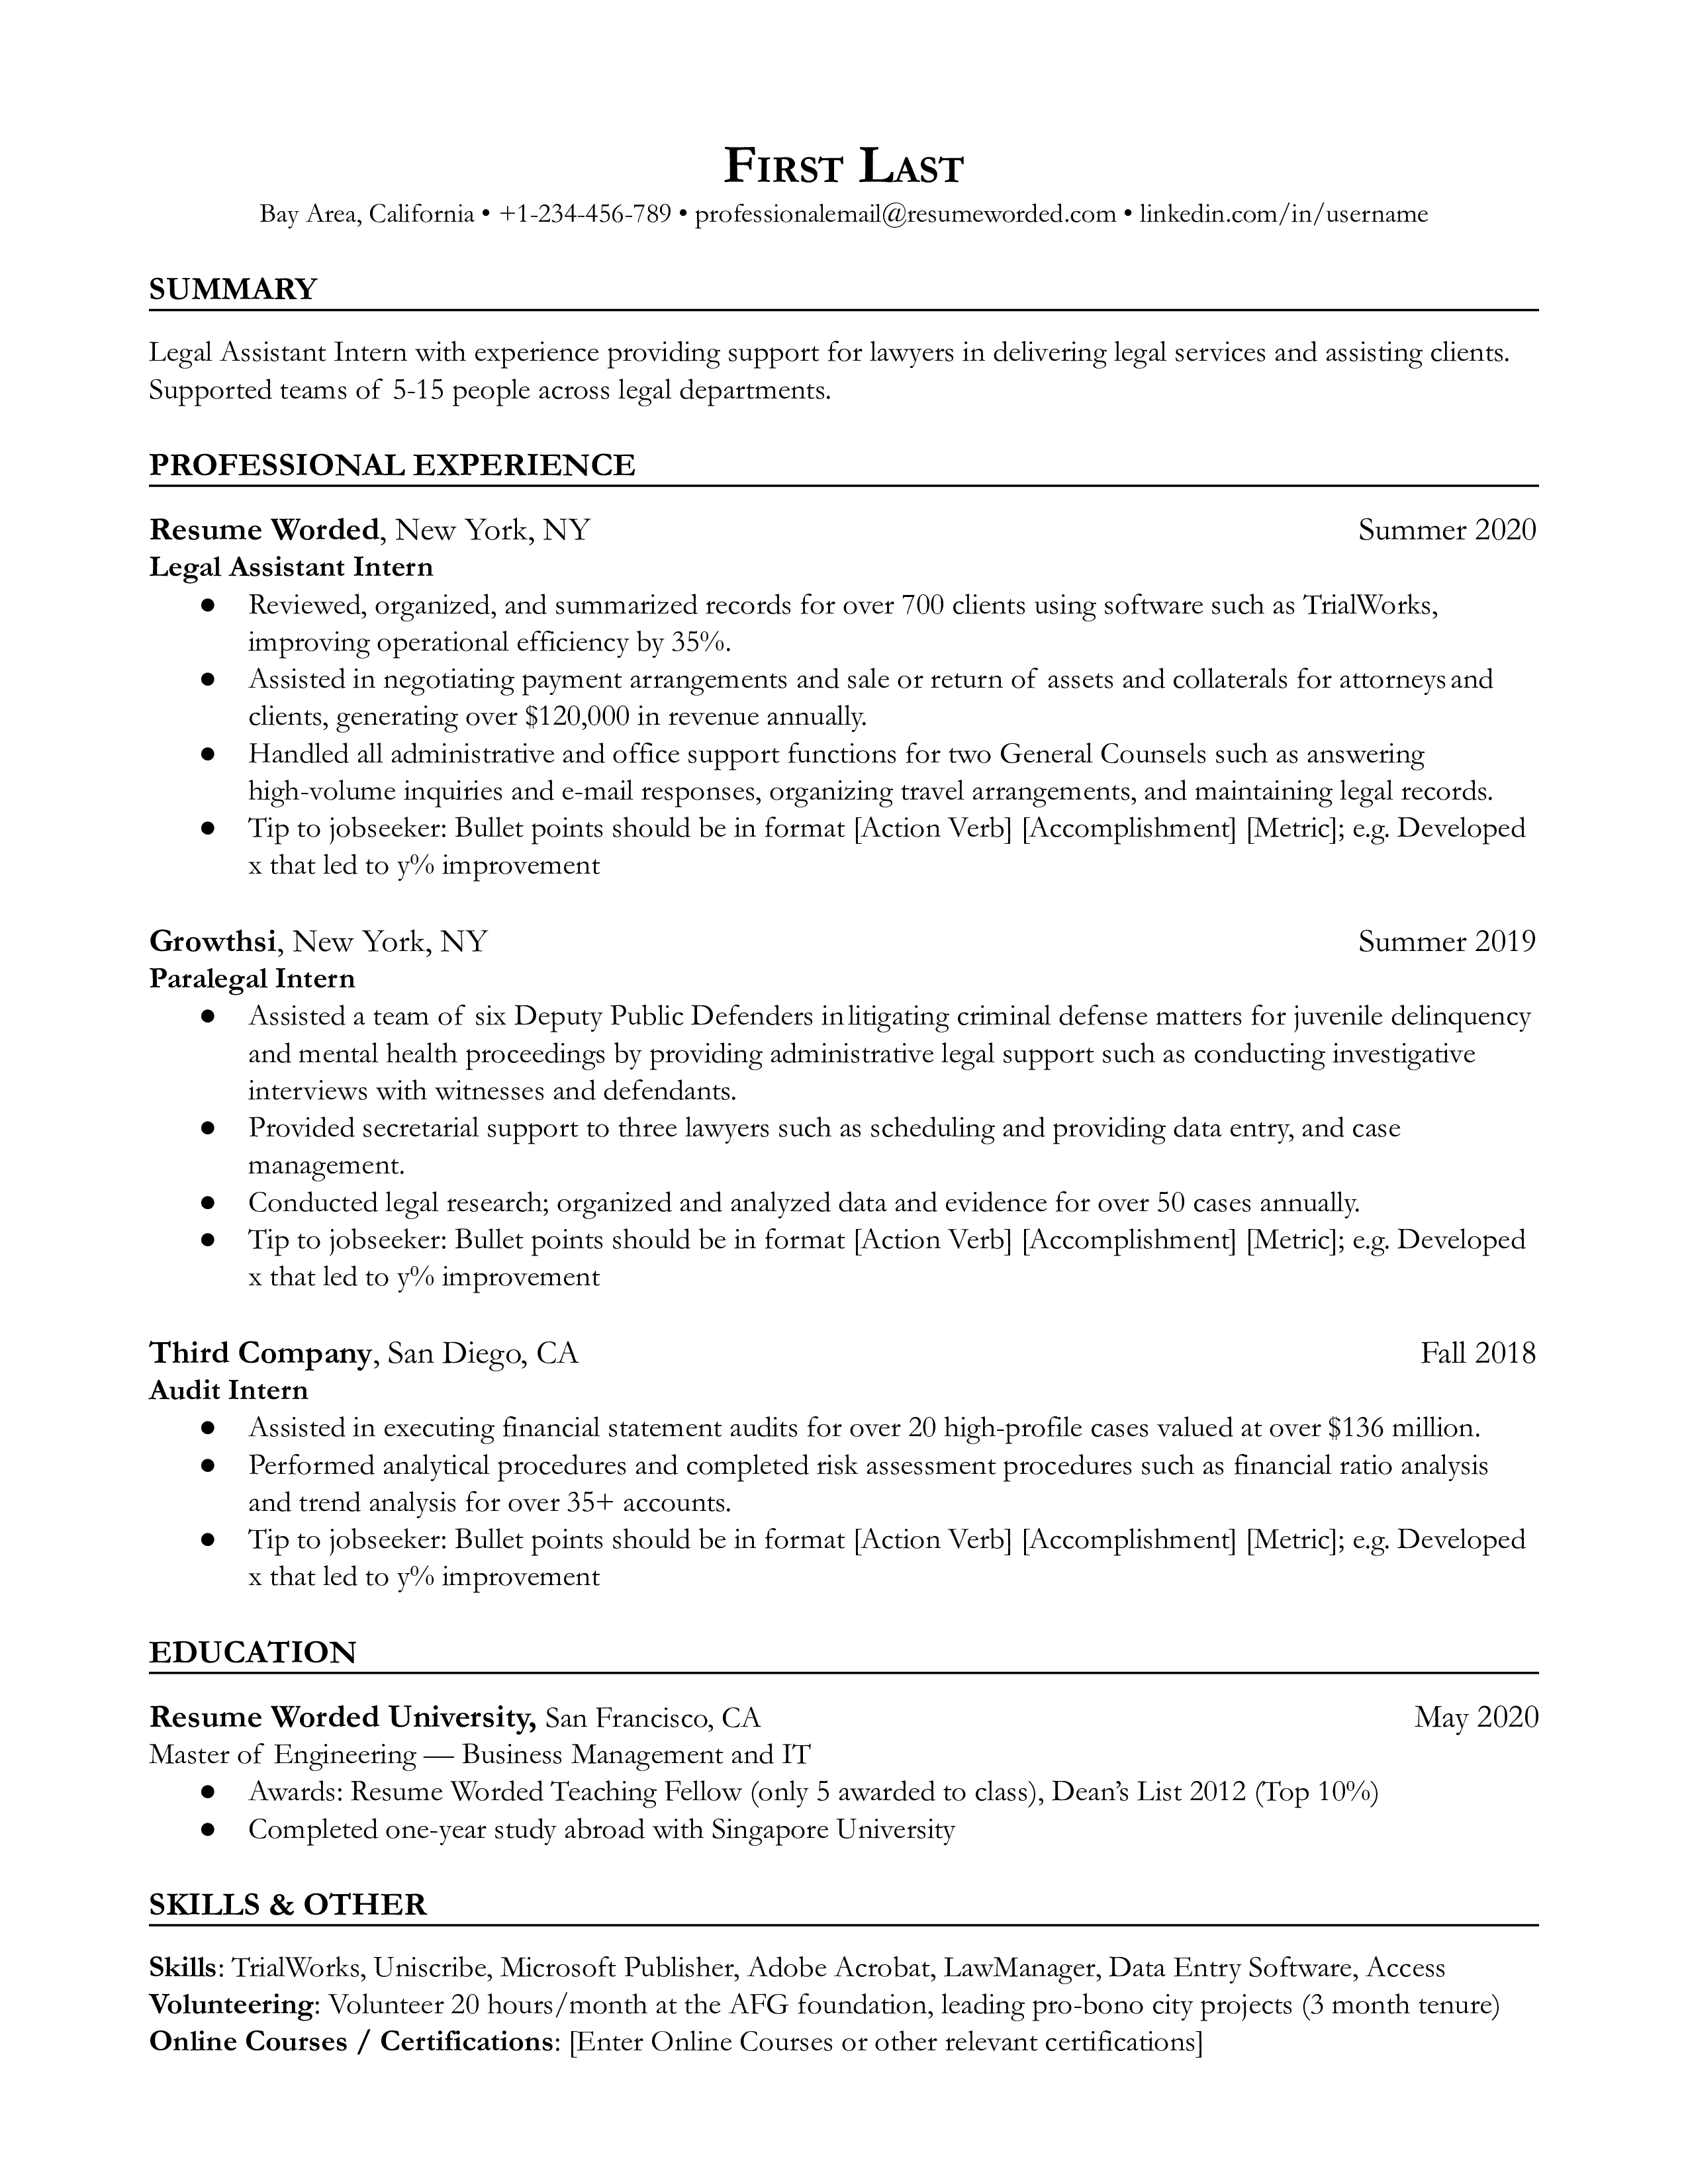 Entry level legal assistant resume template example using a resume title and summary and framing accomplishments with strong action verbs